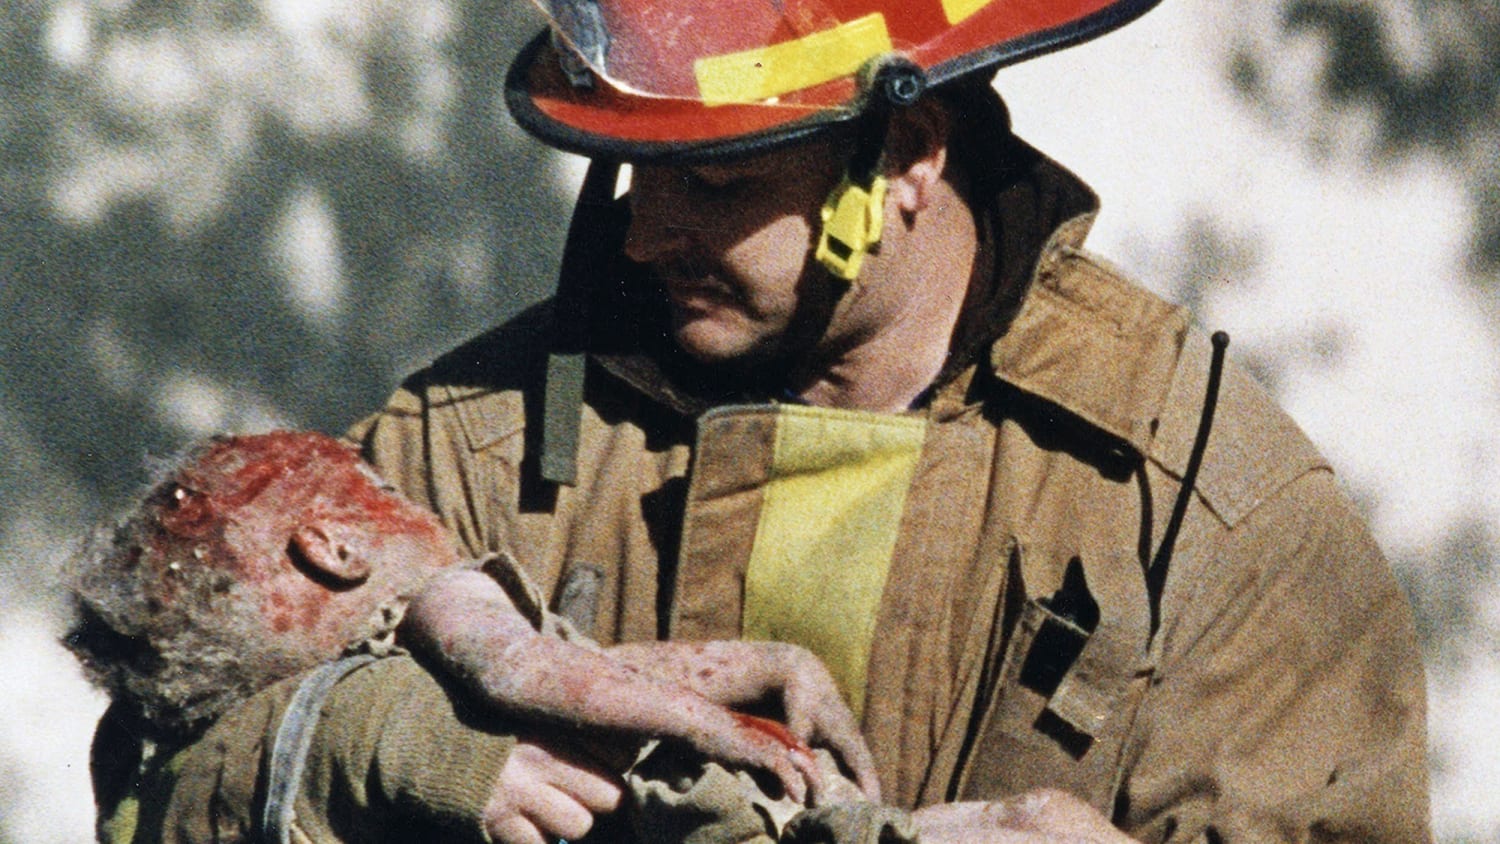 firefighter carrying baby